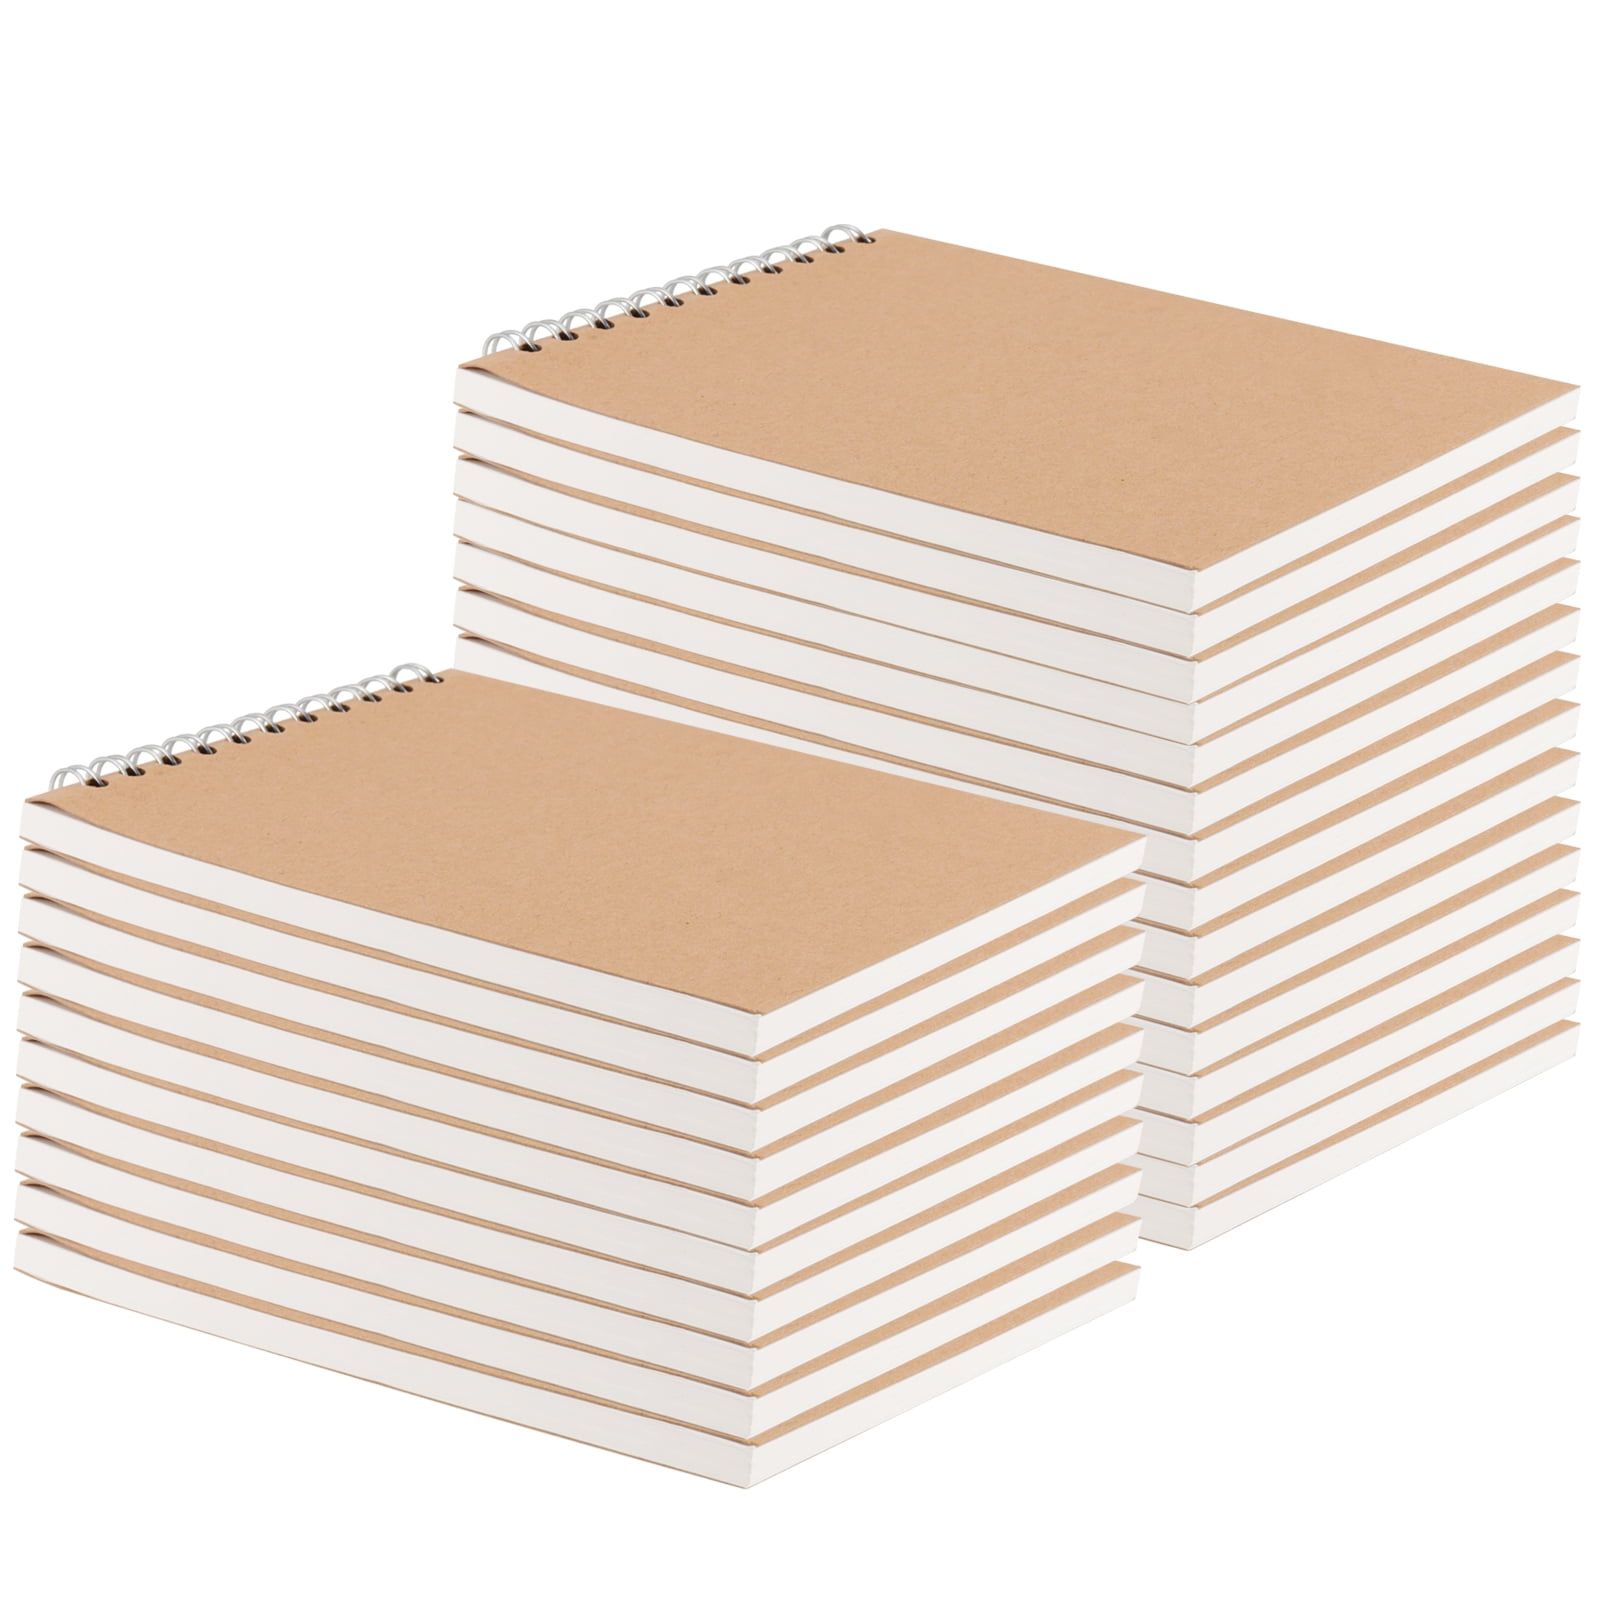 Fuutreo 100 Pack Mini Blank Notebooks A6 Blank Unlined Hardcover Notebook  Bulk White Paper Journals Sketchbooks for Kids Students Teacher Drawing